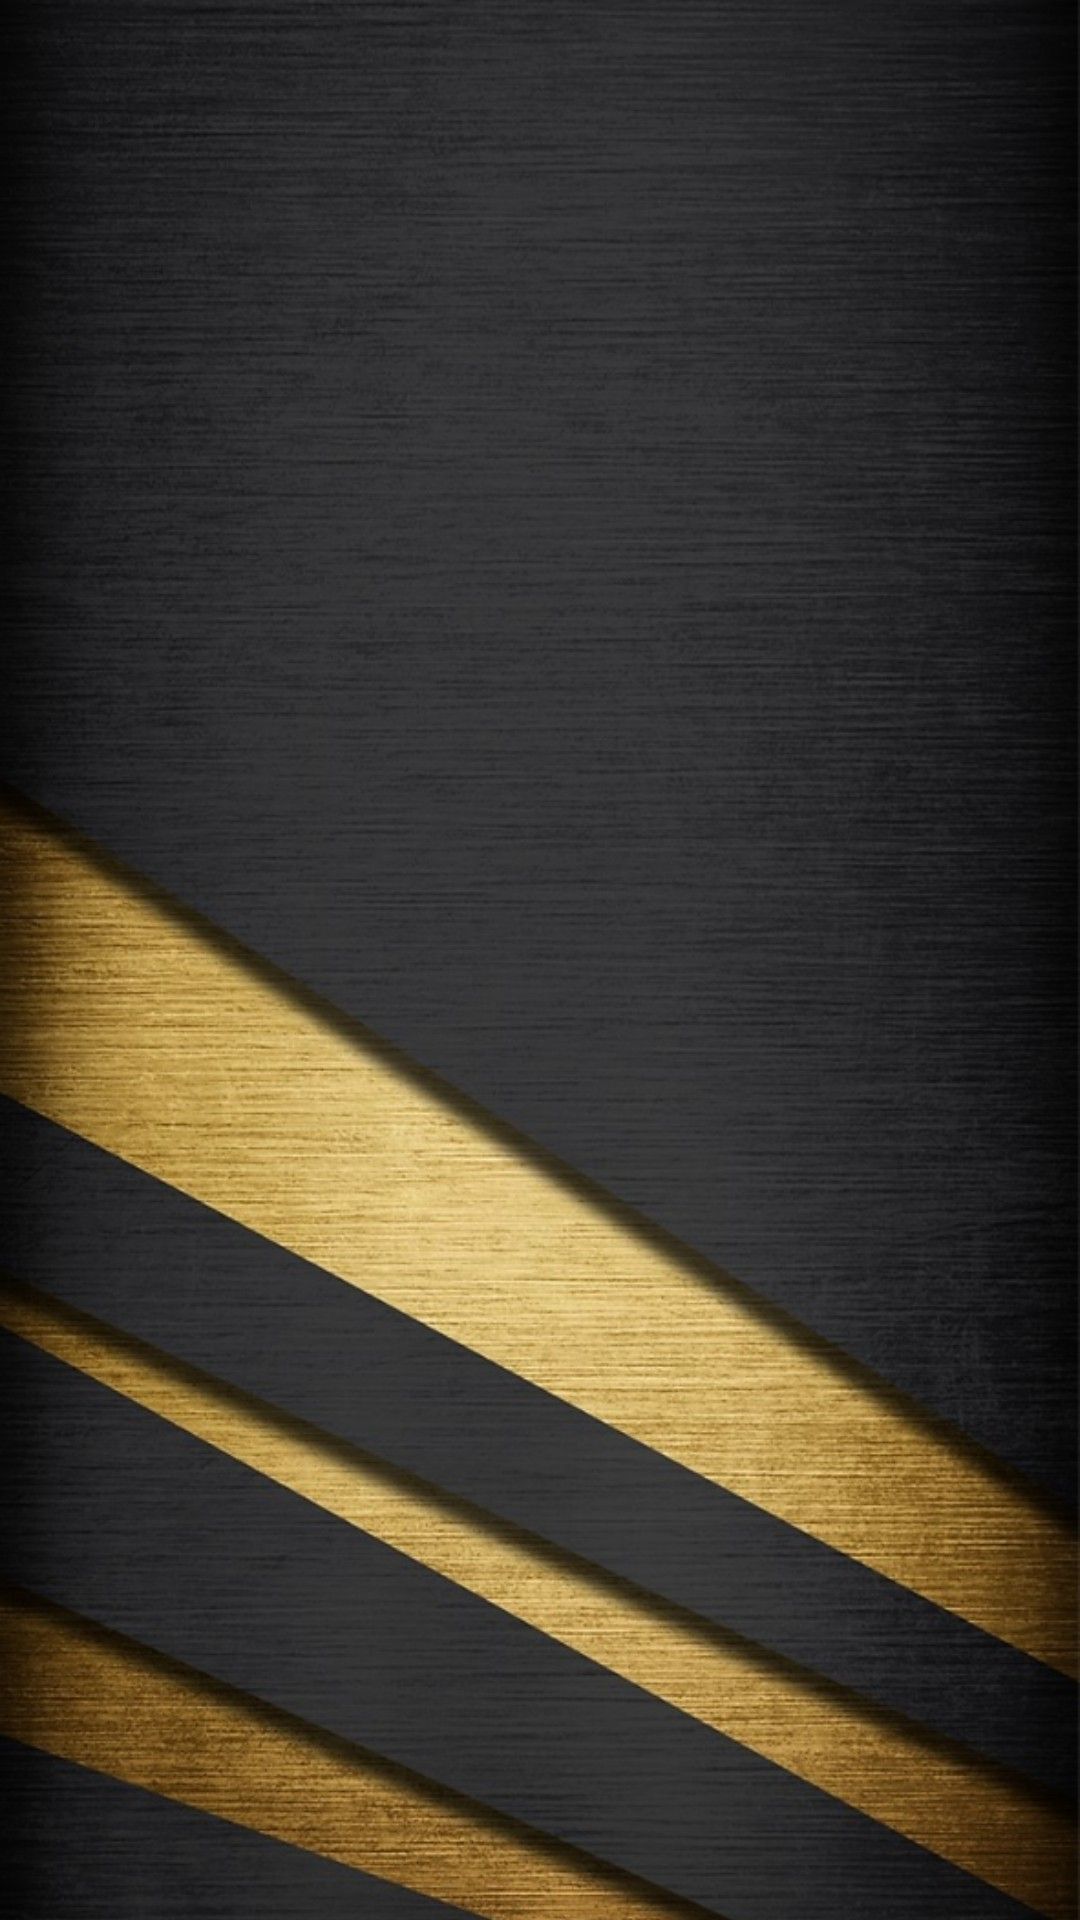 MuchaTseBle. Android wallpaper, Grey and gold wallpaper, Gold wallpaper